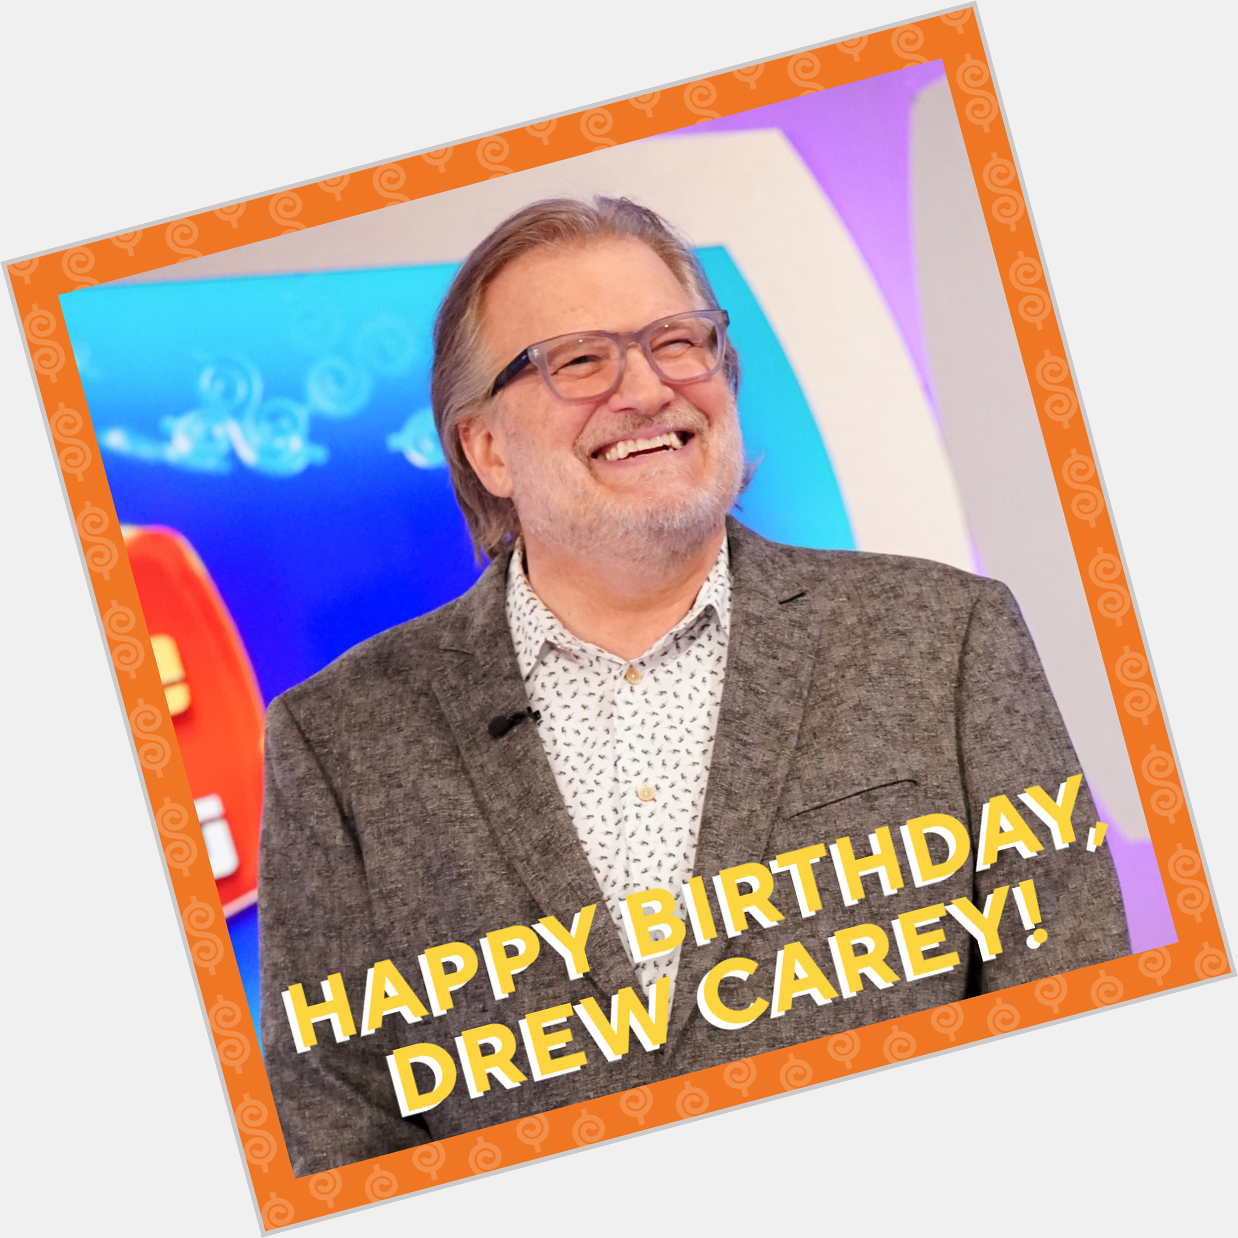 Happy birthday to the host of The Price Is Right, Drew Carey!! 